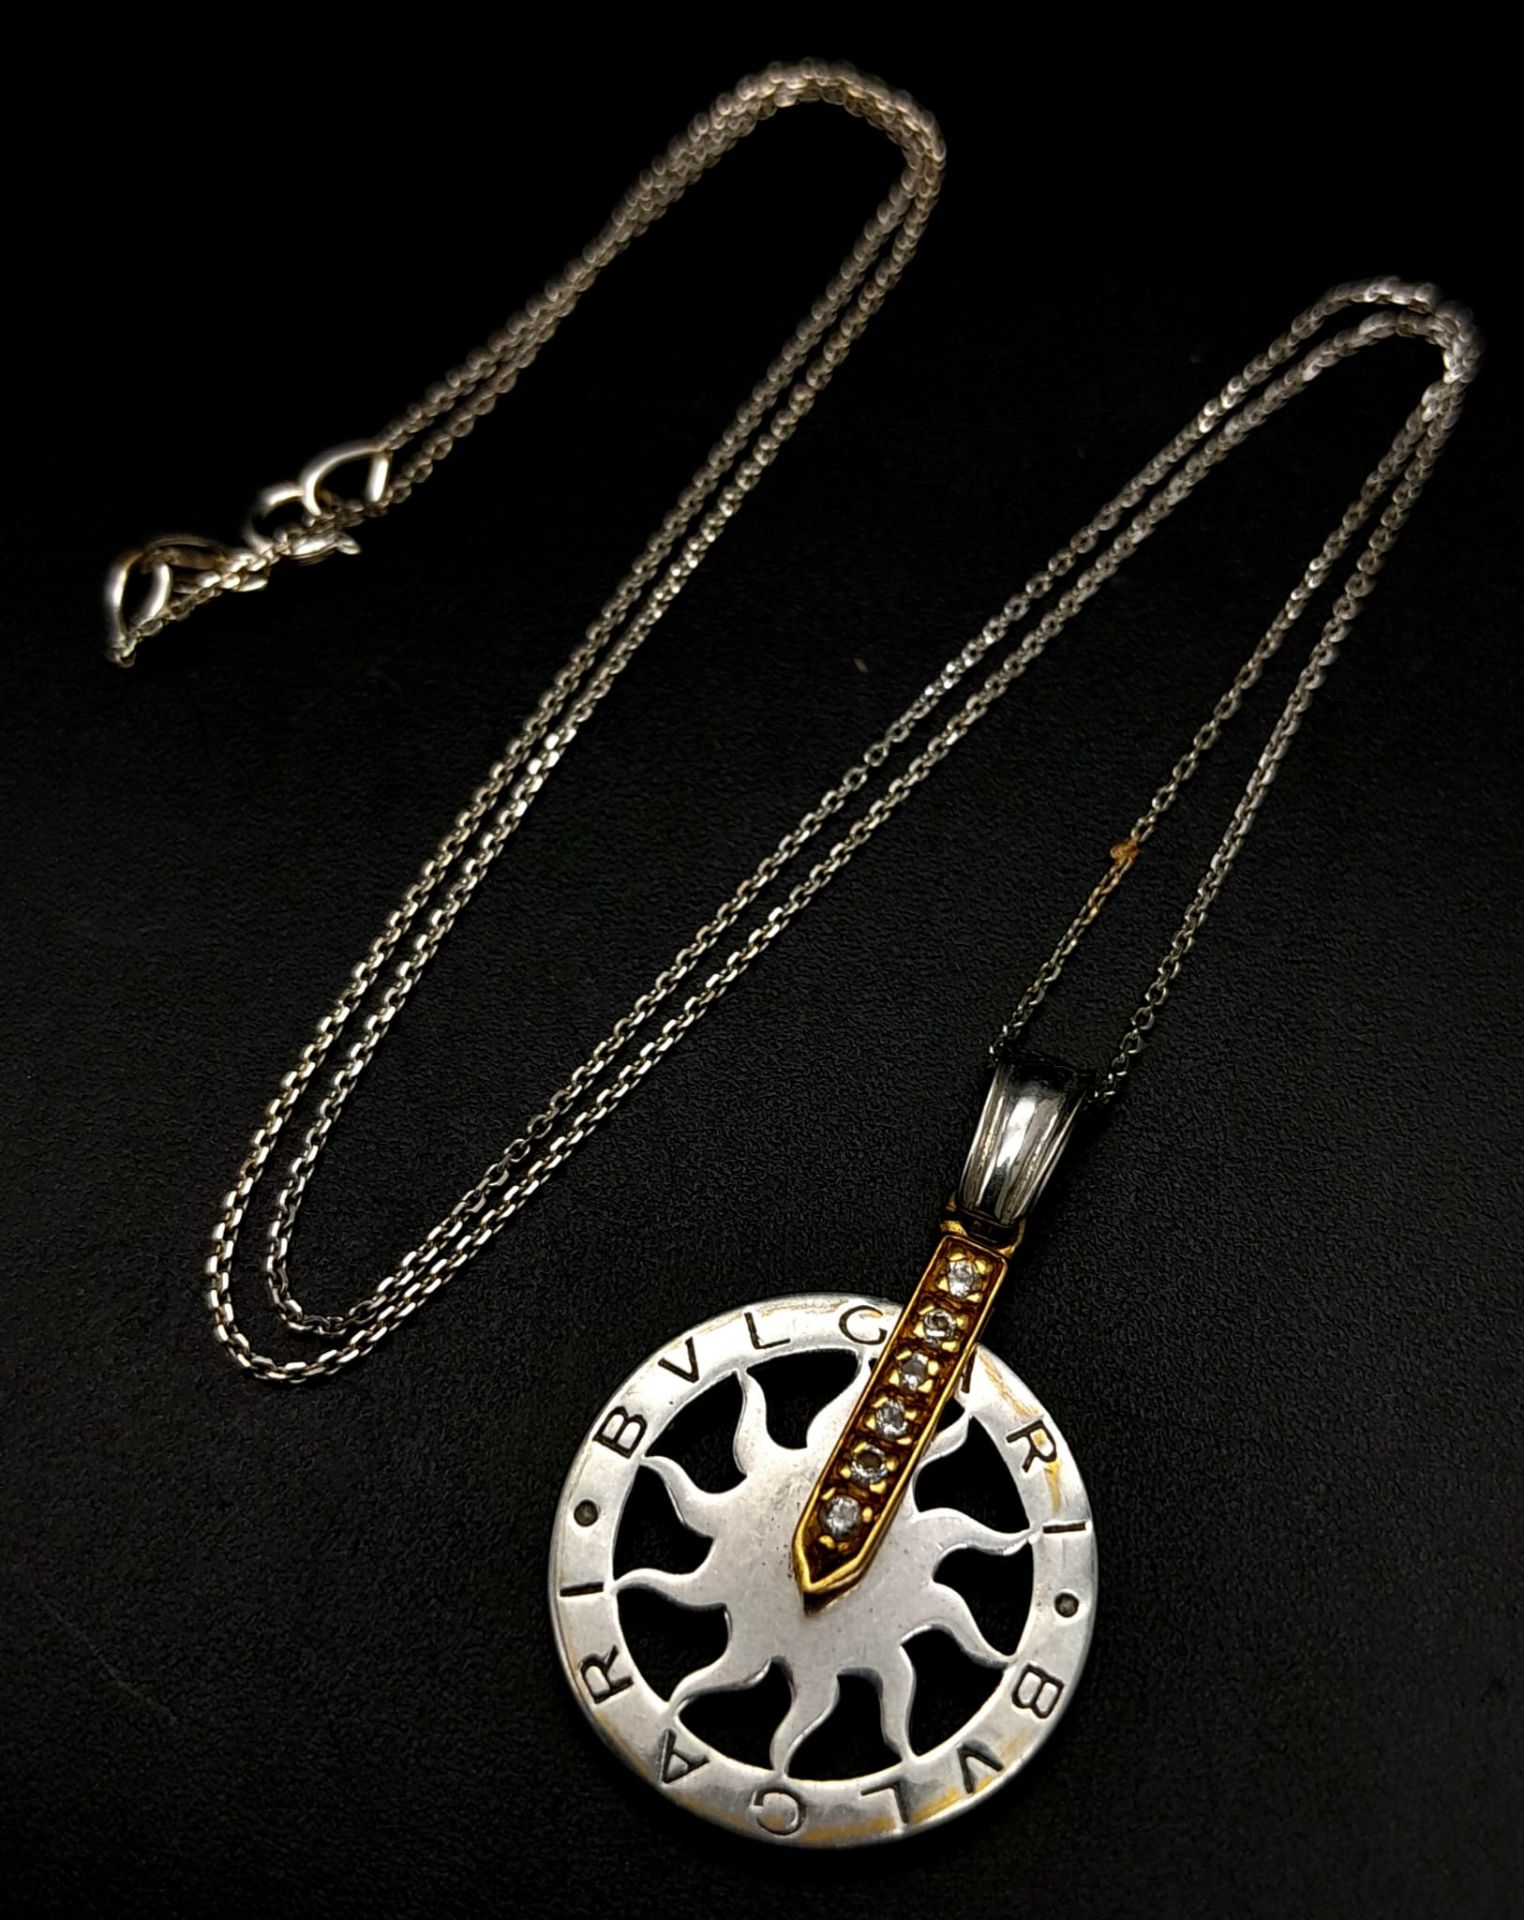 An 18 K white gold chain necklace with a BULGARI 18 K white and yellow gold pendant carrying six